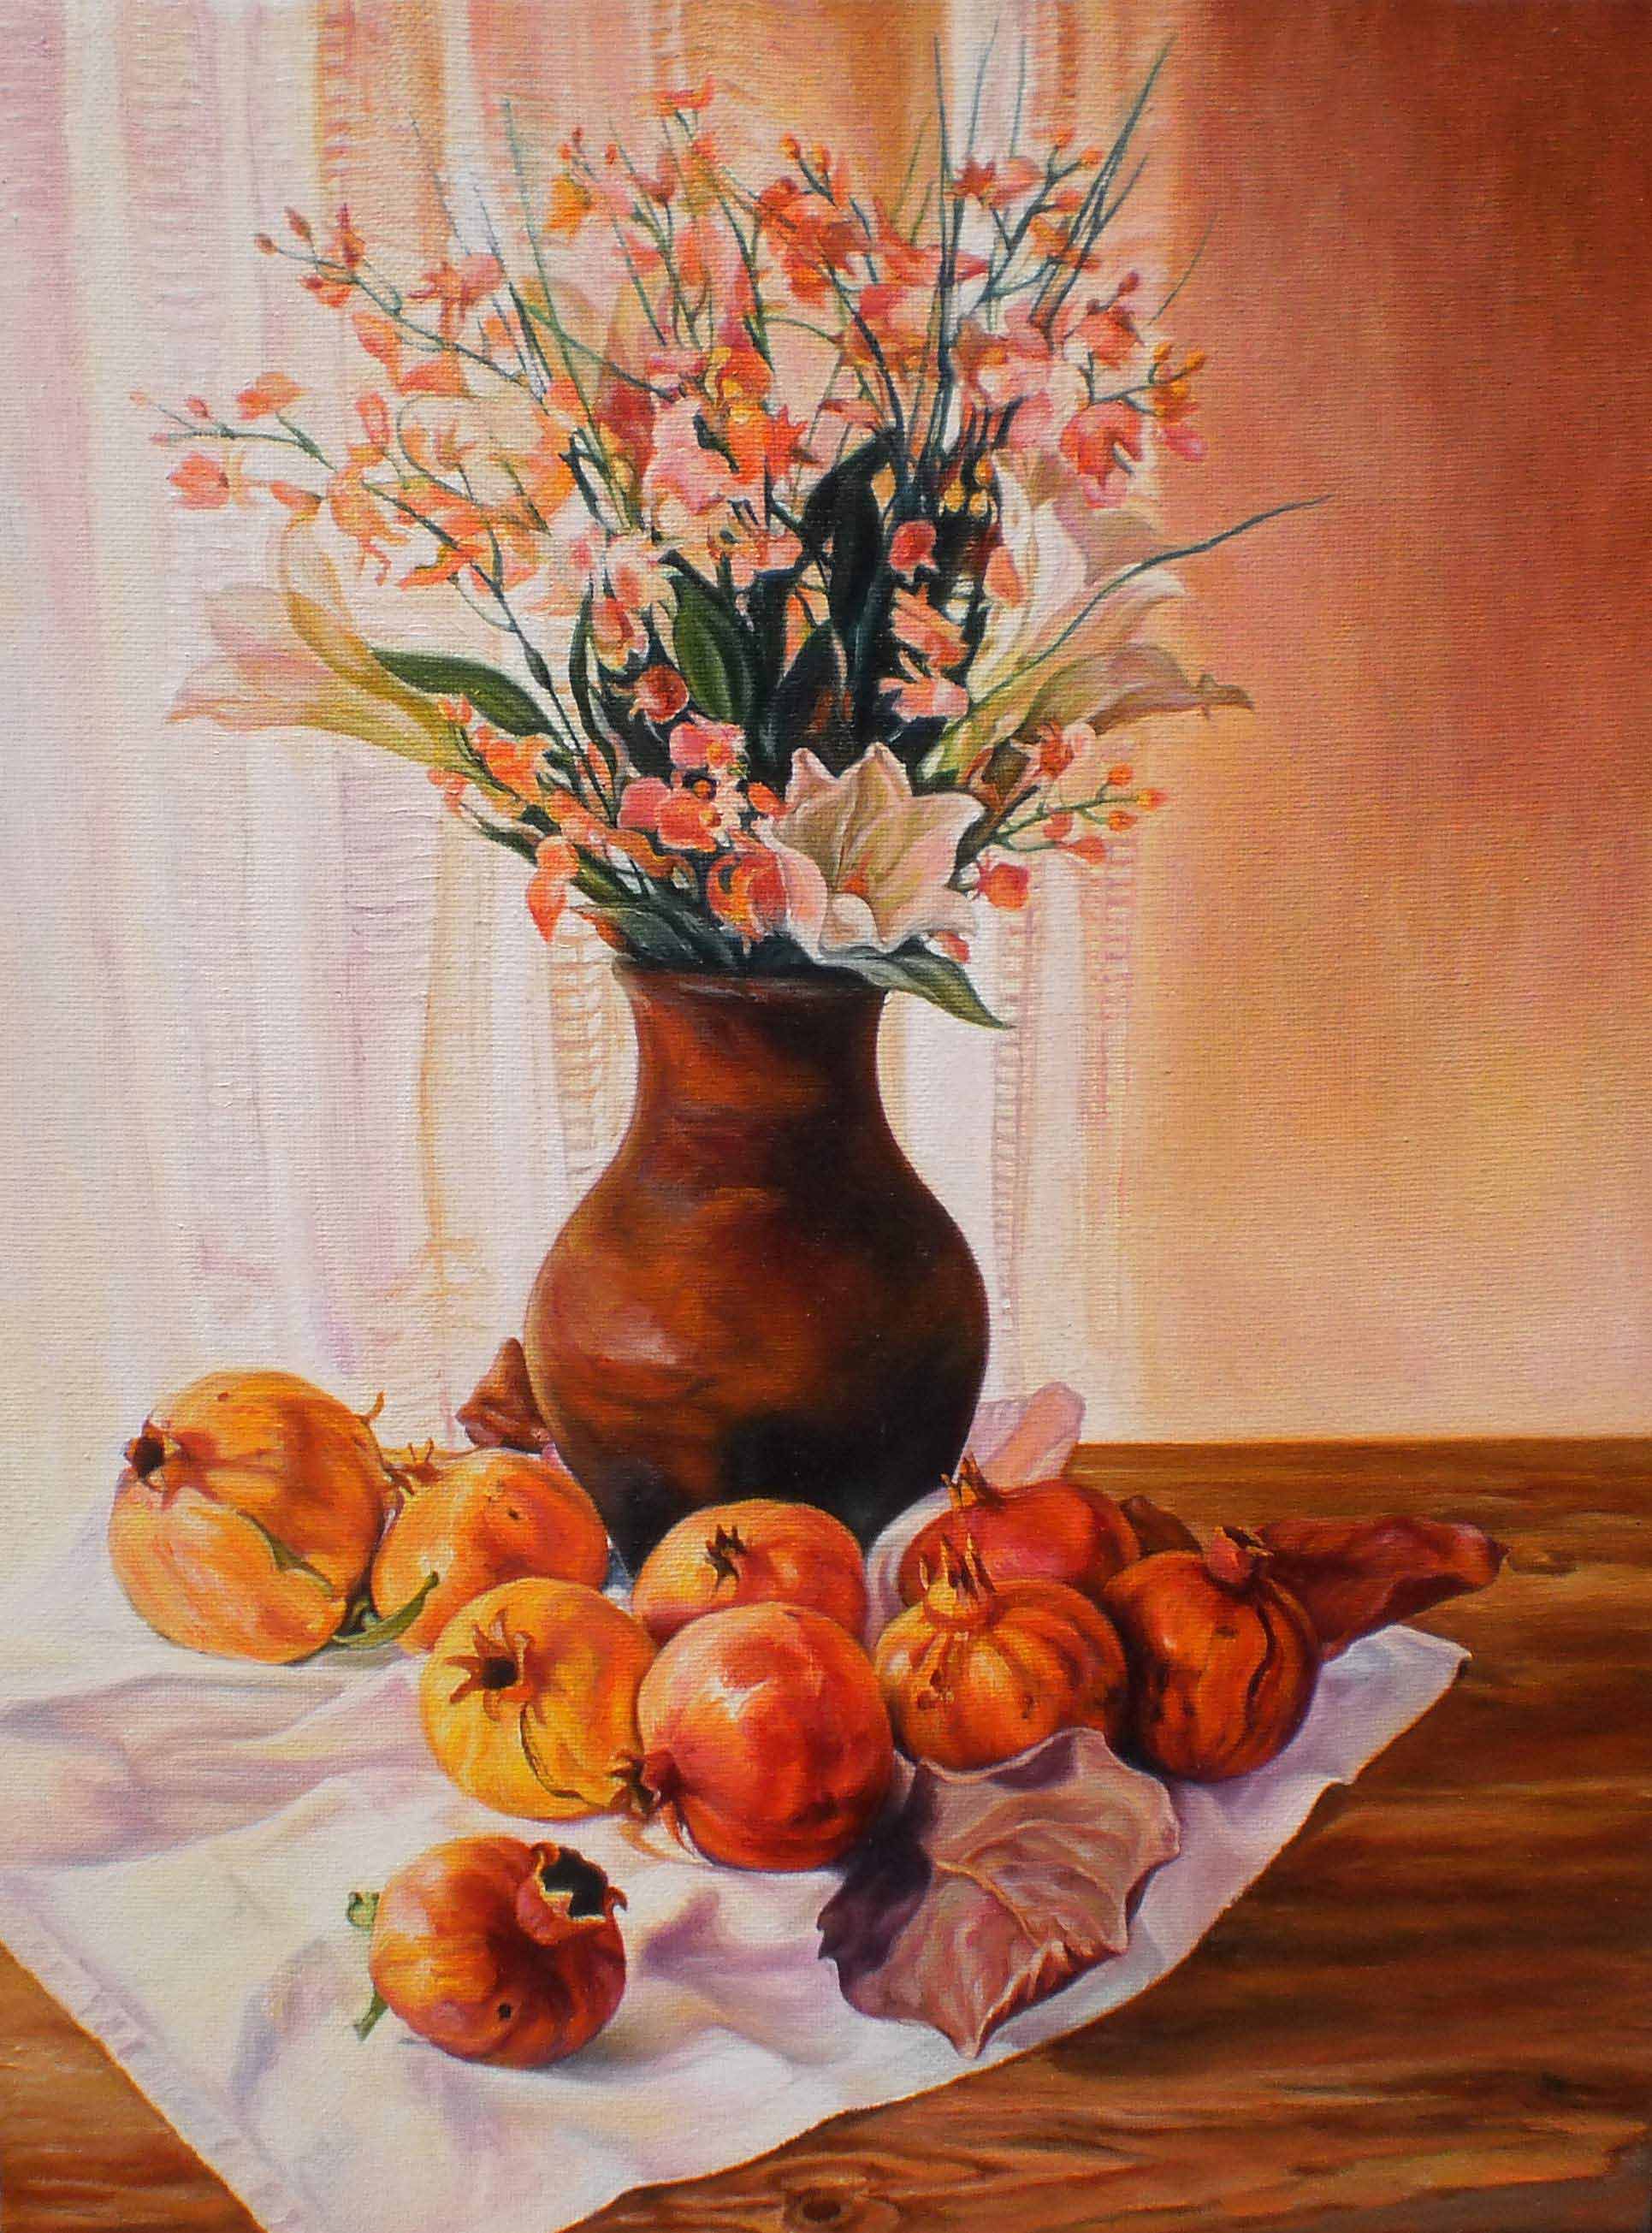 -Vase with flowers and pomegranates- Dimensions: 40cm x 30cm